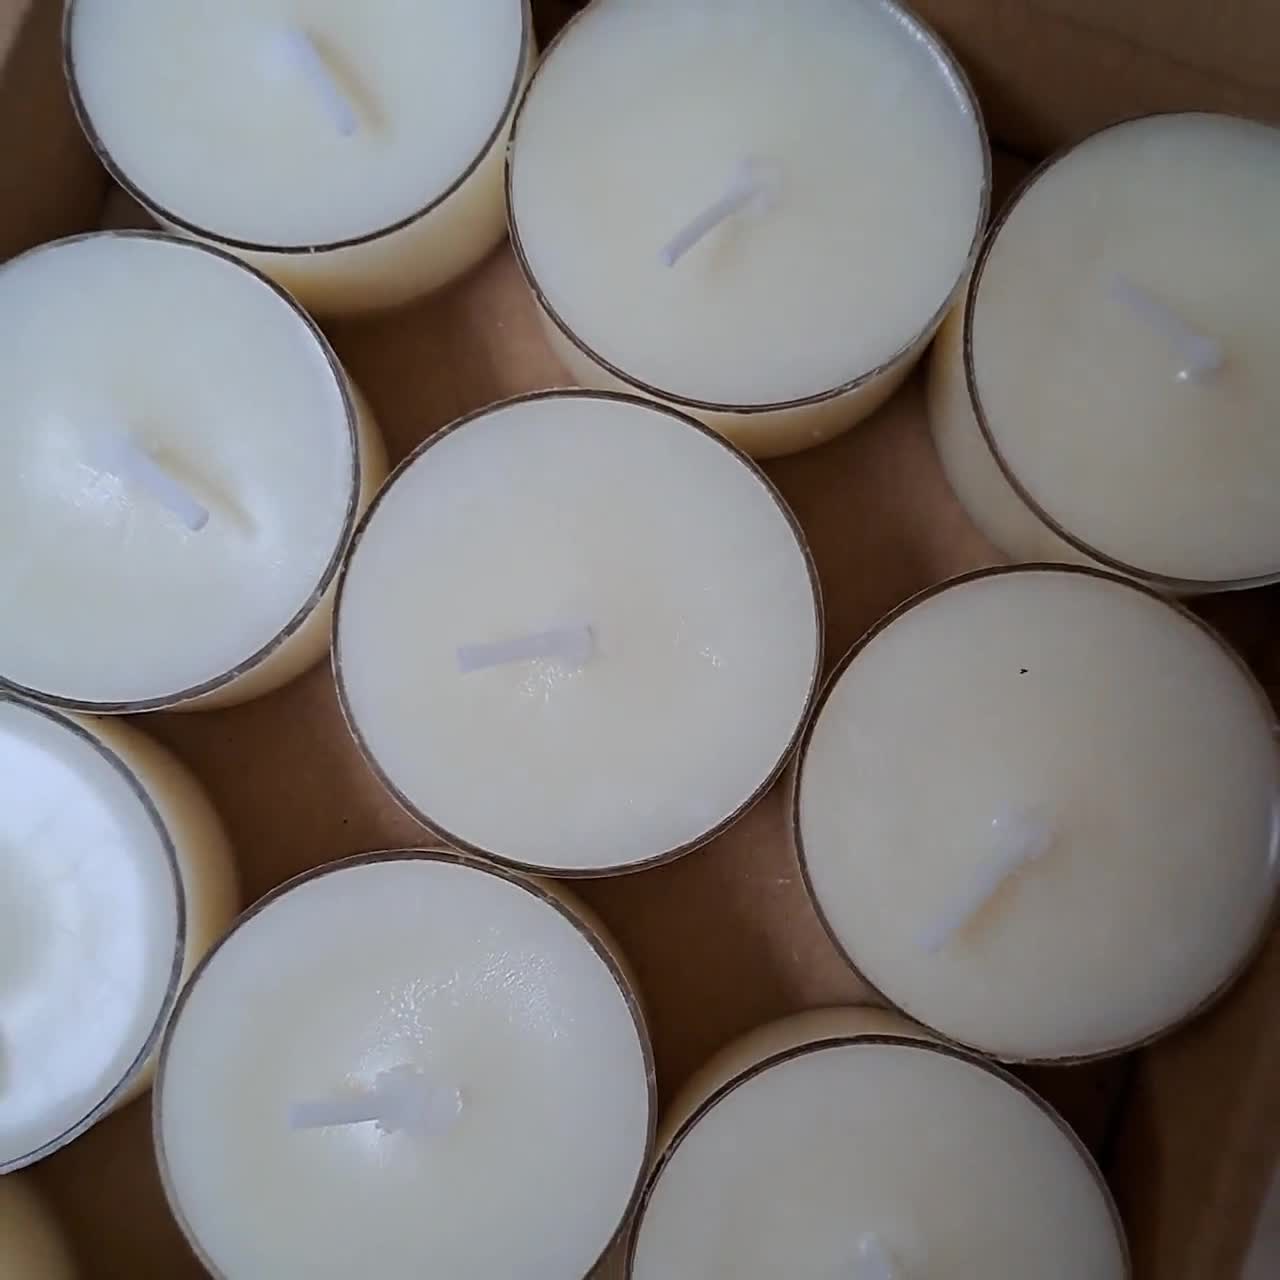 Vanilla Scented Candle, Relaxing Soy Wax Natural Candles 